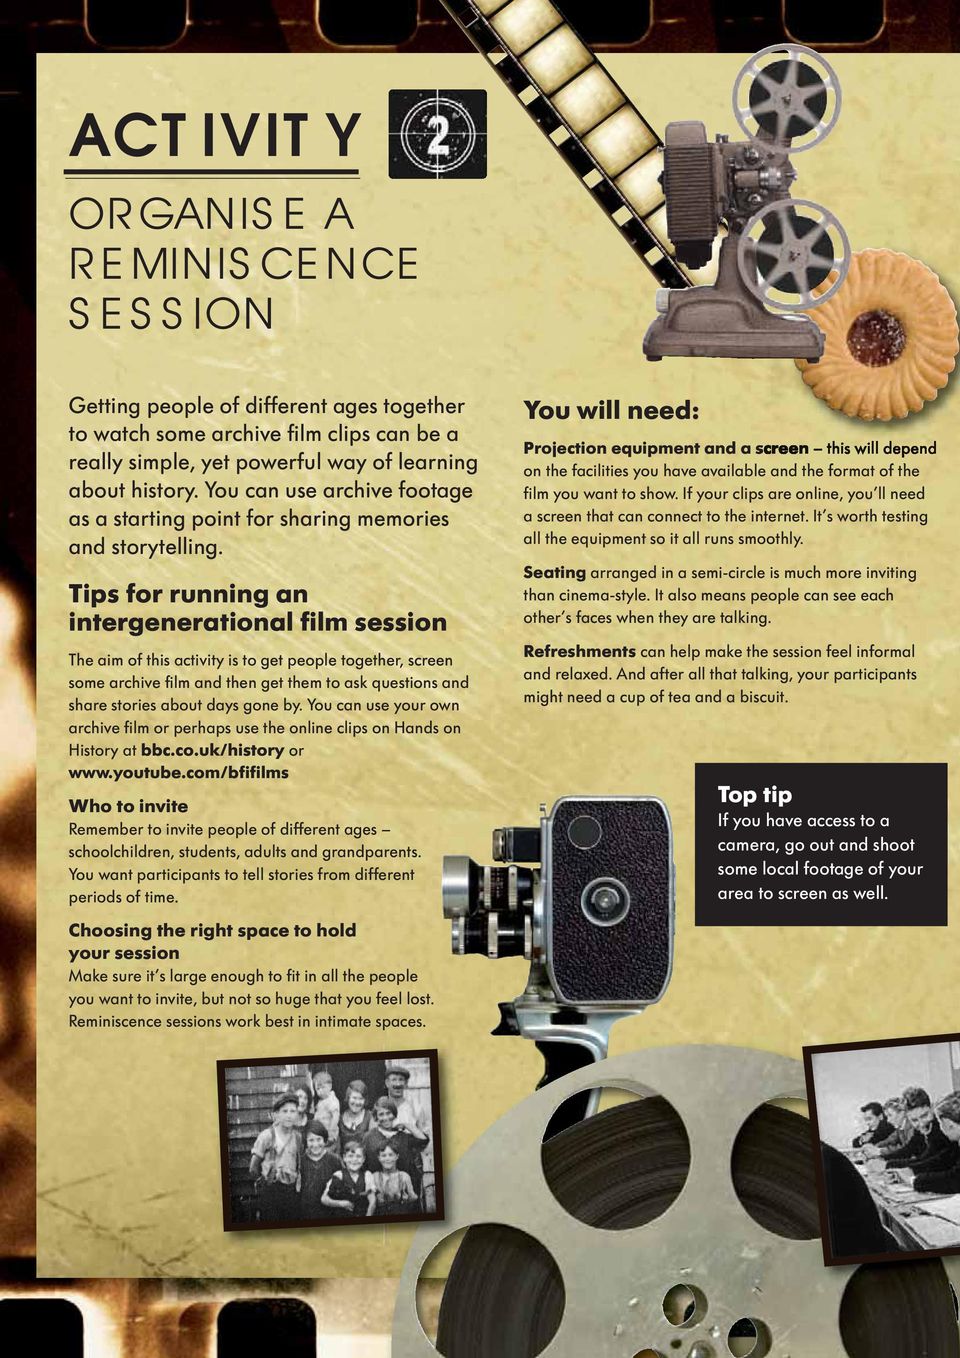 Tips for running an intergenerational film session The aim of this activity is to get people together, screen some archive film and then get them to ask questions and share stories about days gone by.